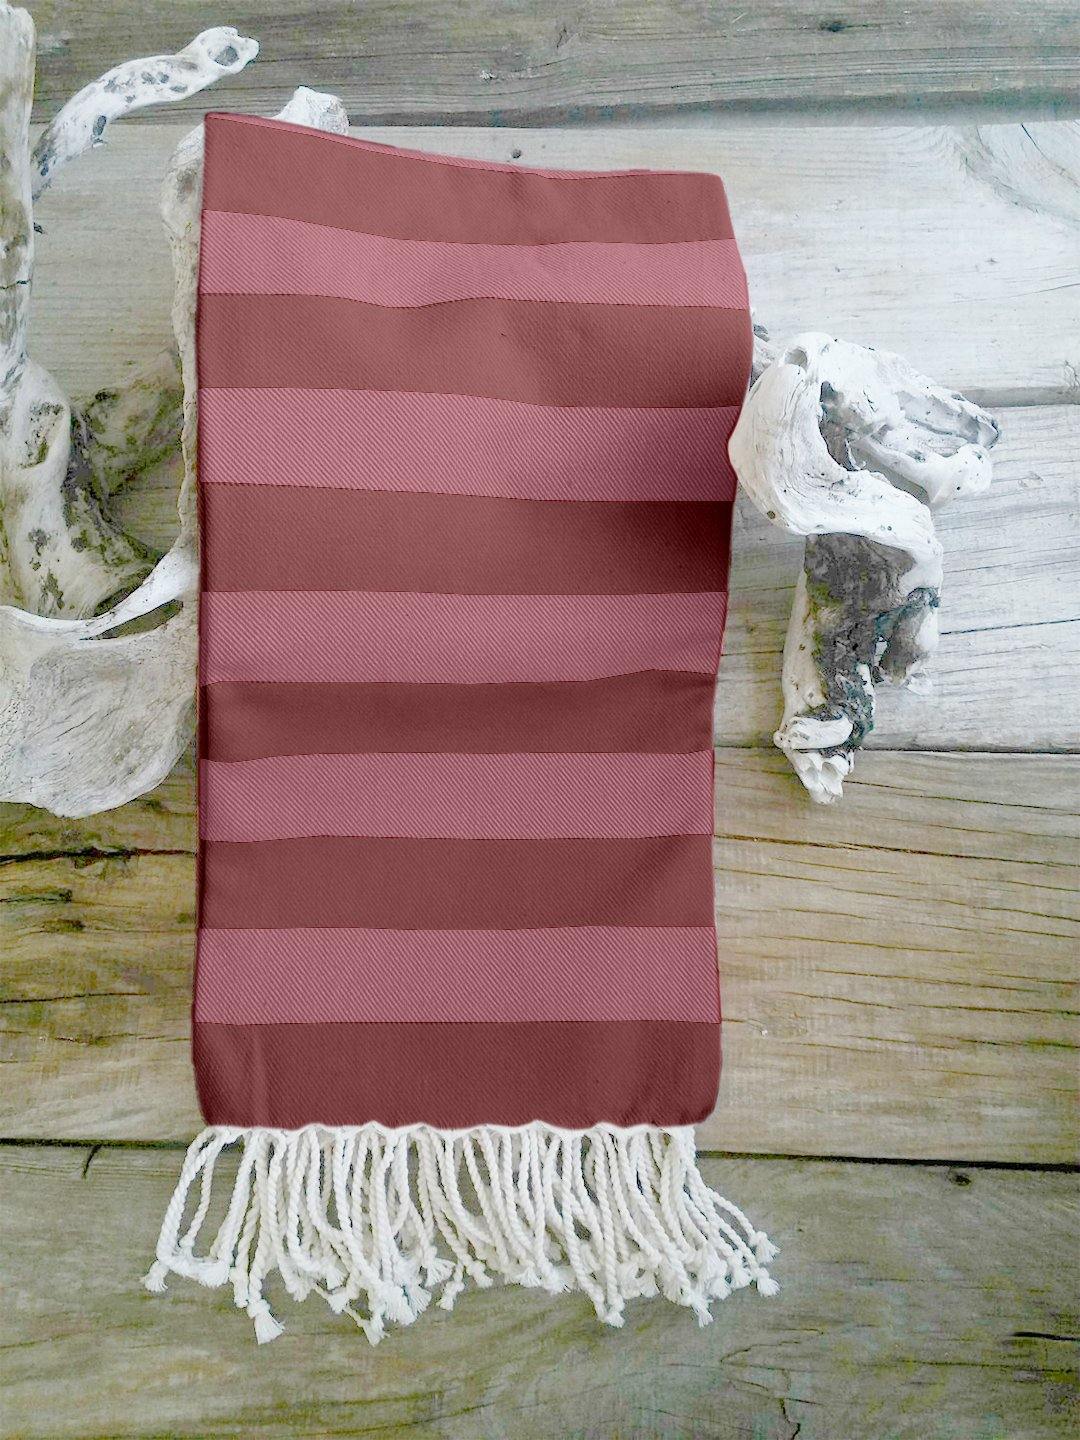 Lushomes Hammam Red Fouta Towel Cotton Multipurpose Towel With Fringes (76 x 152 cms, Single Pc). - Lushomes